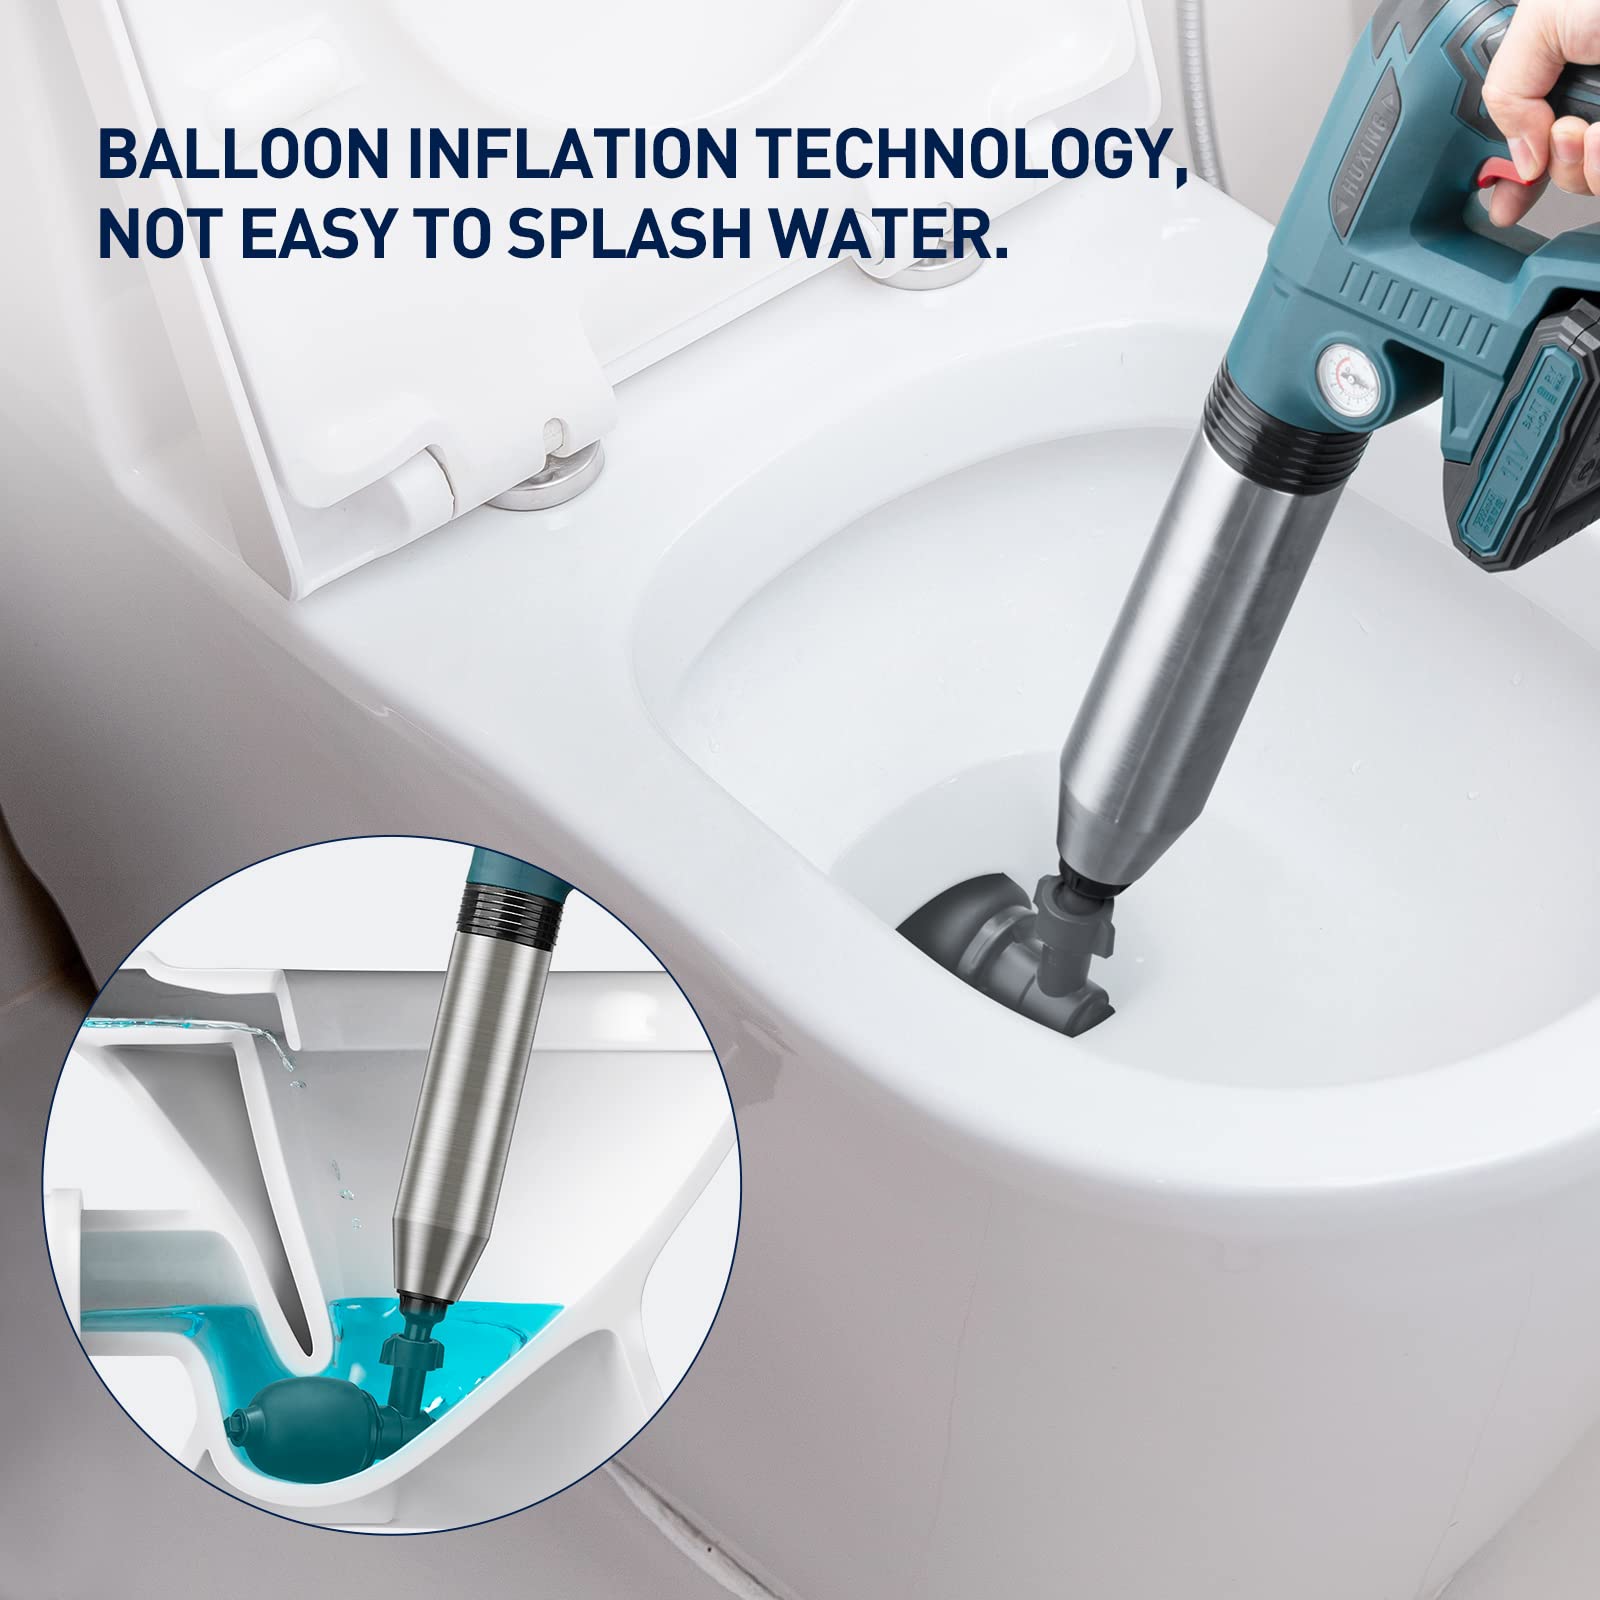 Toilet Plunger, Heavy Duty Drain Clog Blaster, Aiment Unclog Gun, Powerful Pneumatic Dredge Equipment, Electric High Pressure Plunger Applied to Toilet, Floor Drain, Sewer, Clogged Pipe